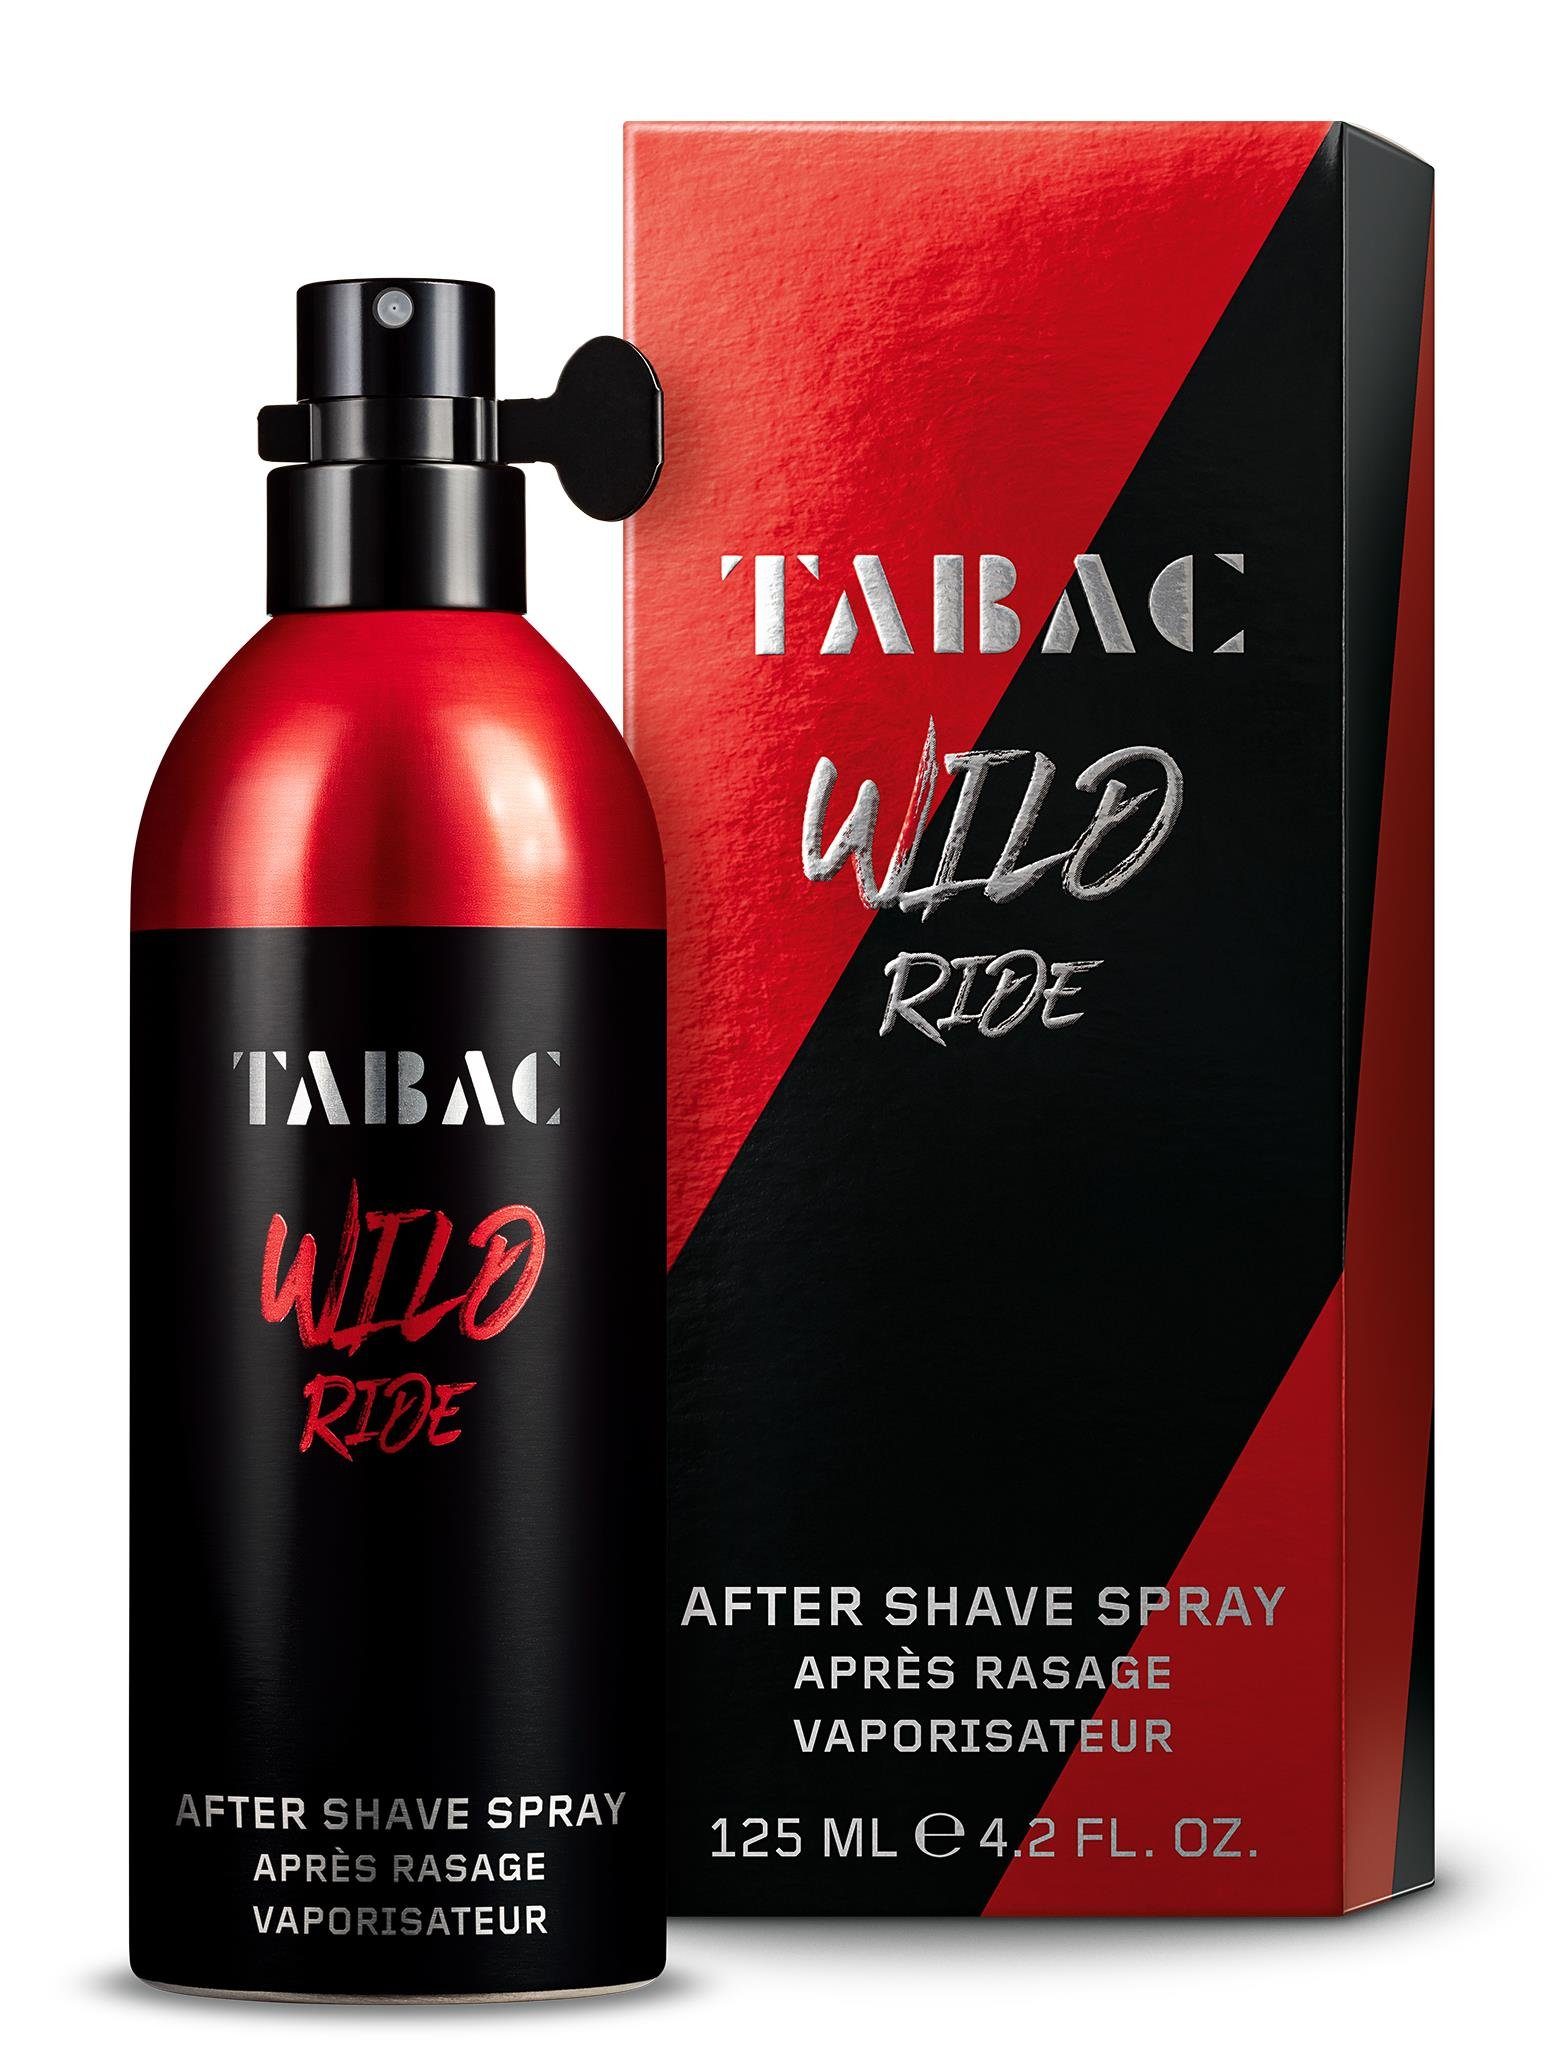 Tabac Wild Ride Gesichts-Reinigungslotion After Ride 125 Lotion Tabac Wild ml Shave